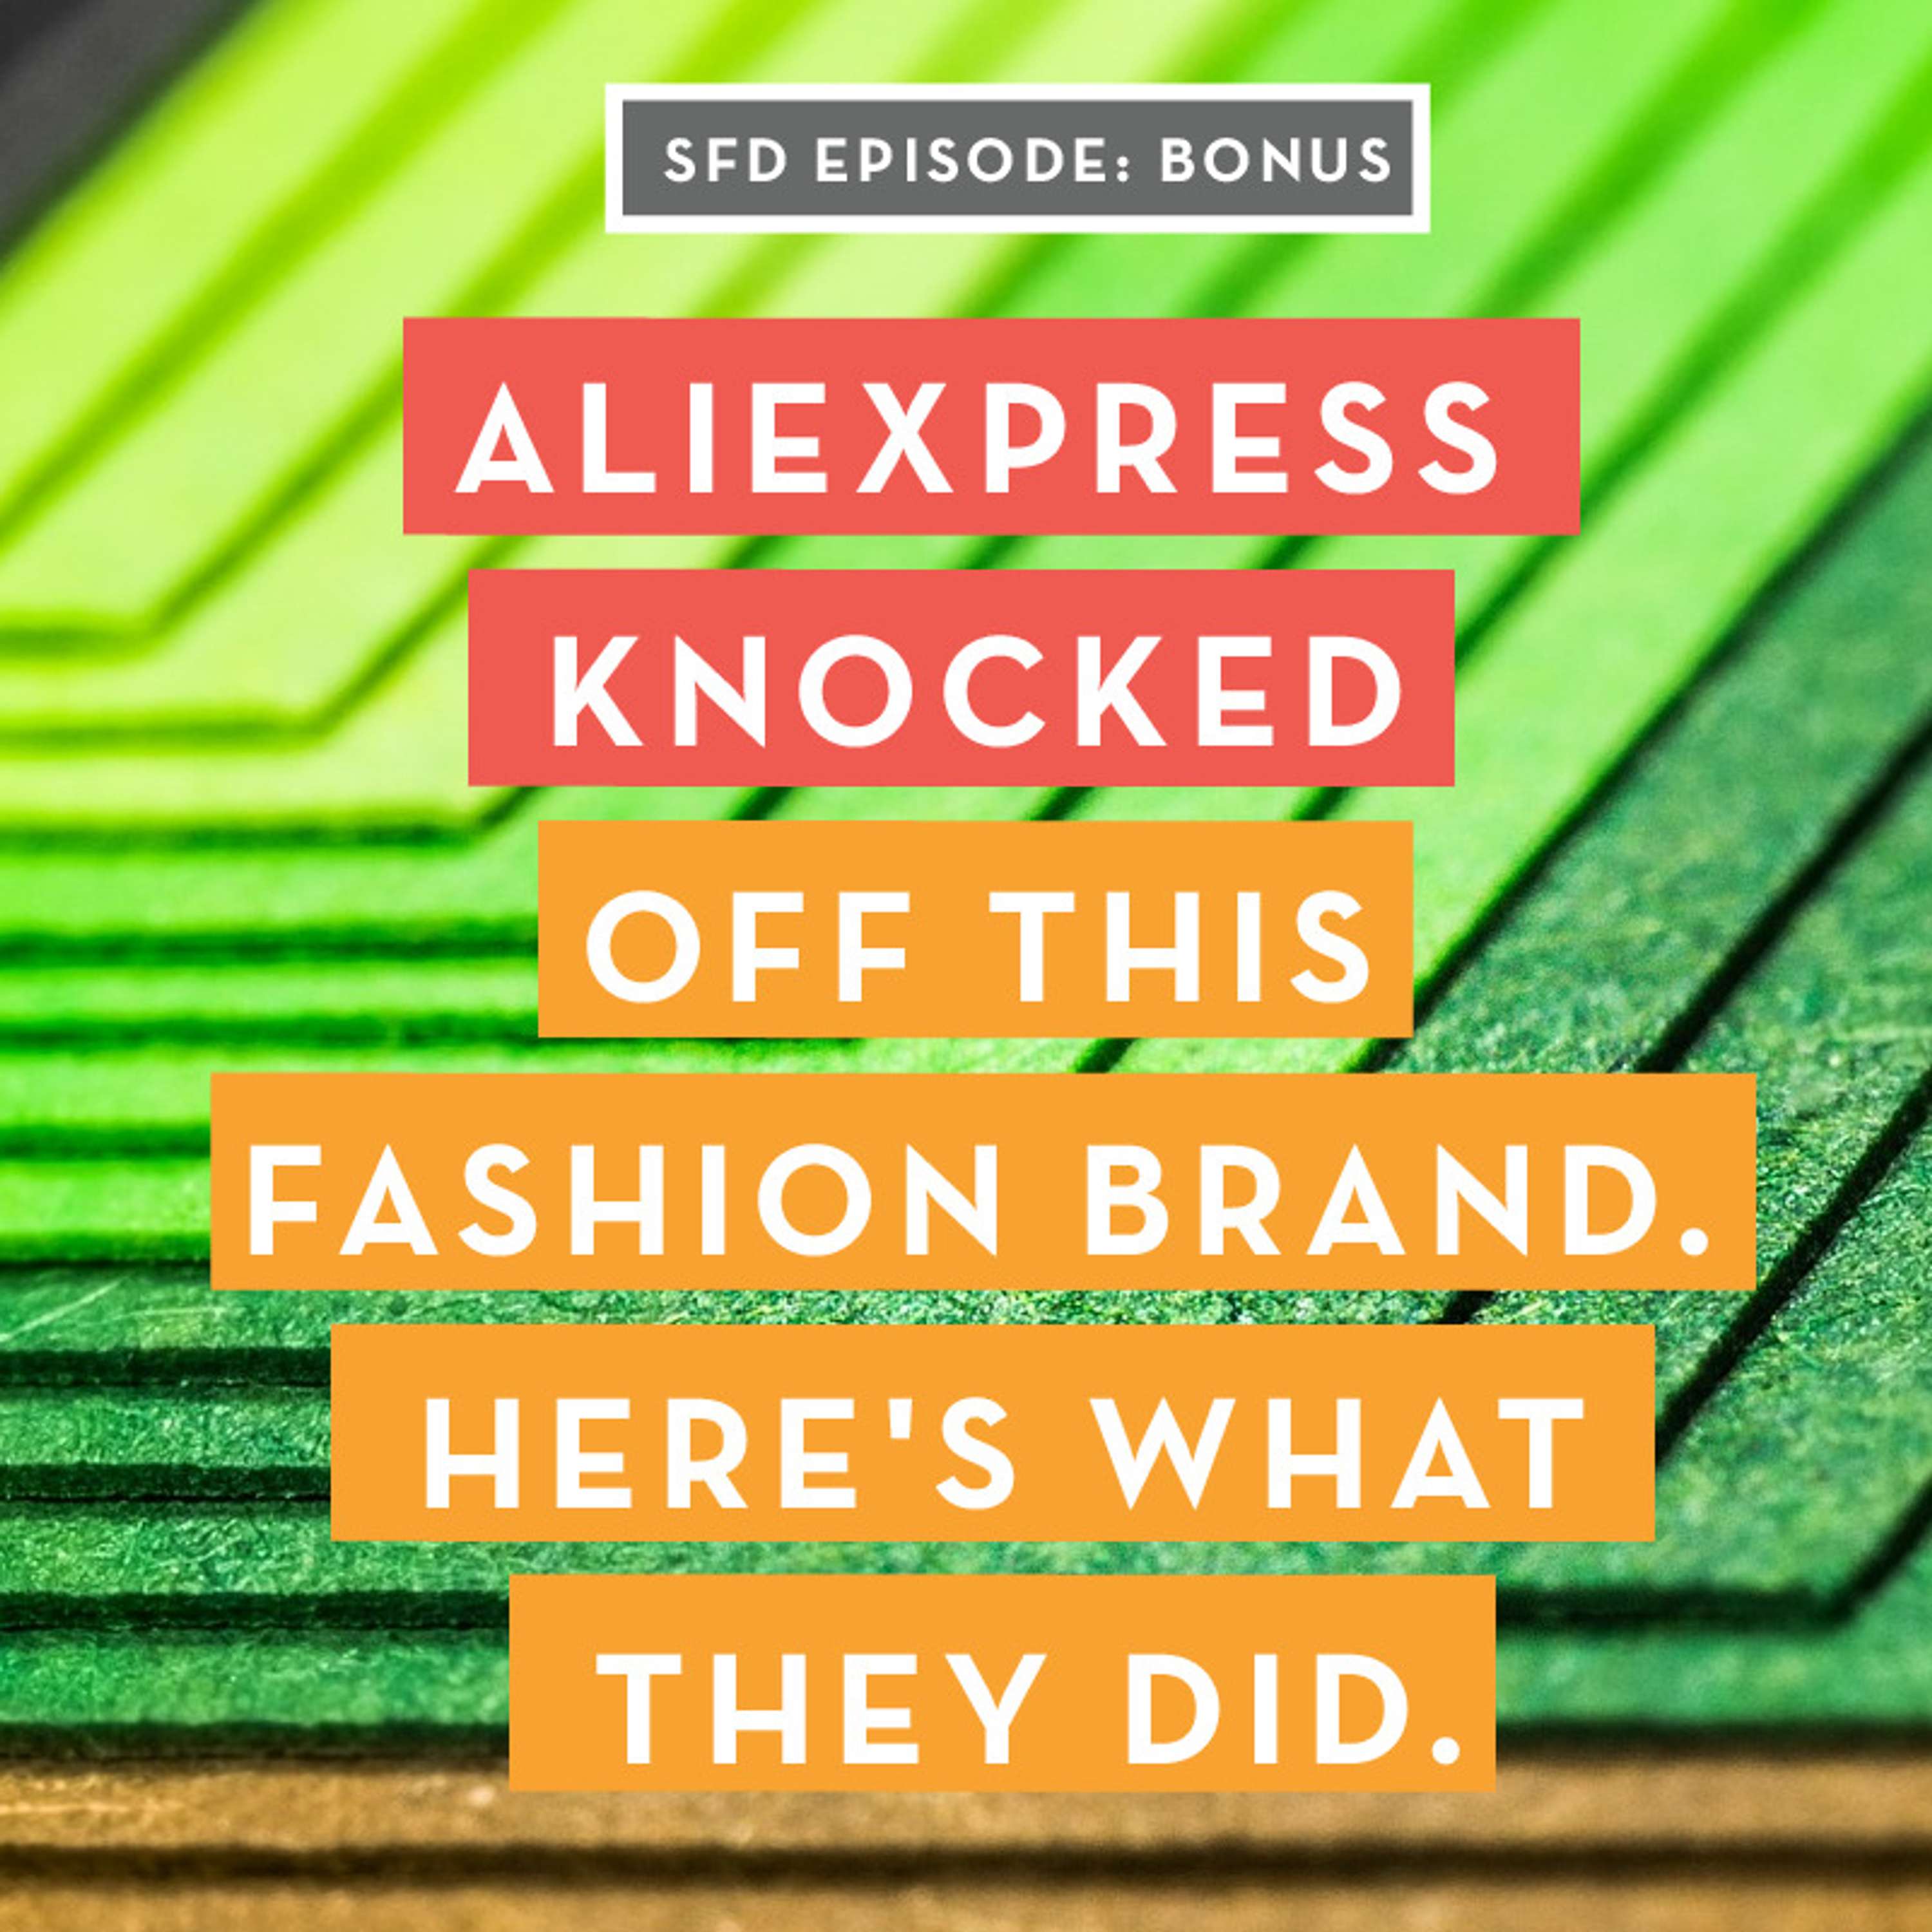 Bonus Episode: Aliexpress knocked off this fashion brand. Here's what they did.